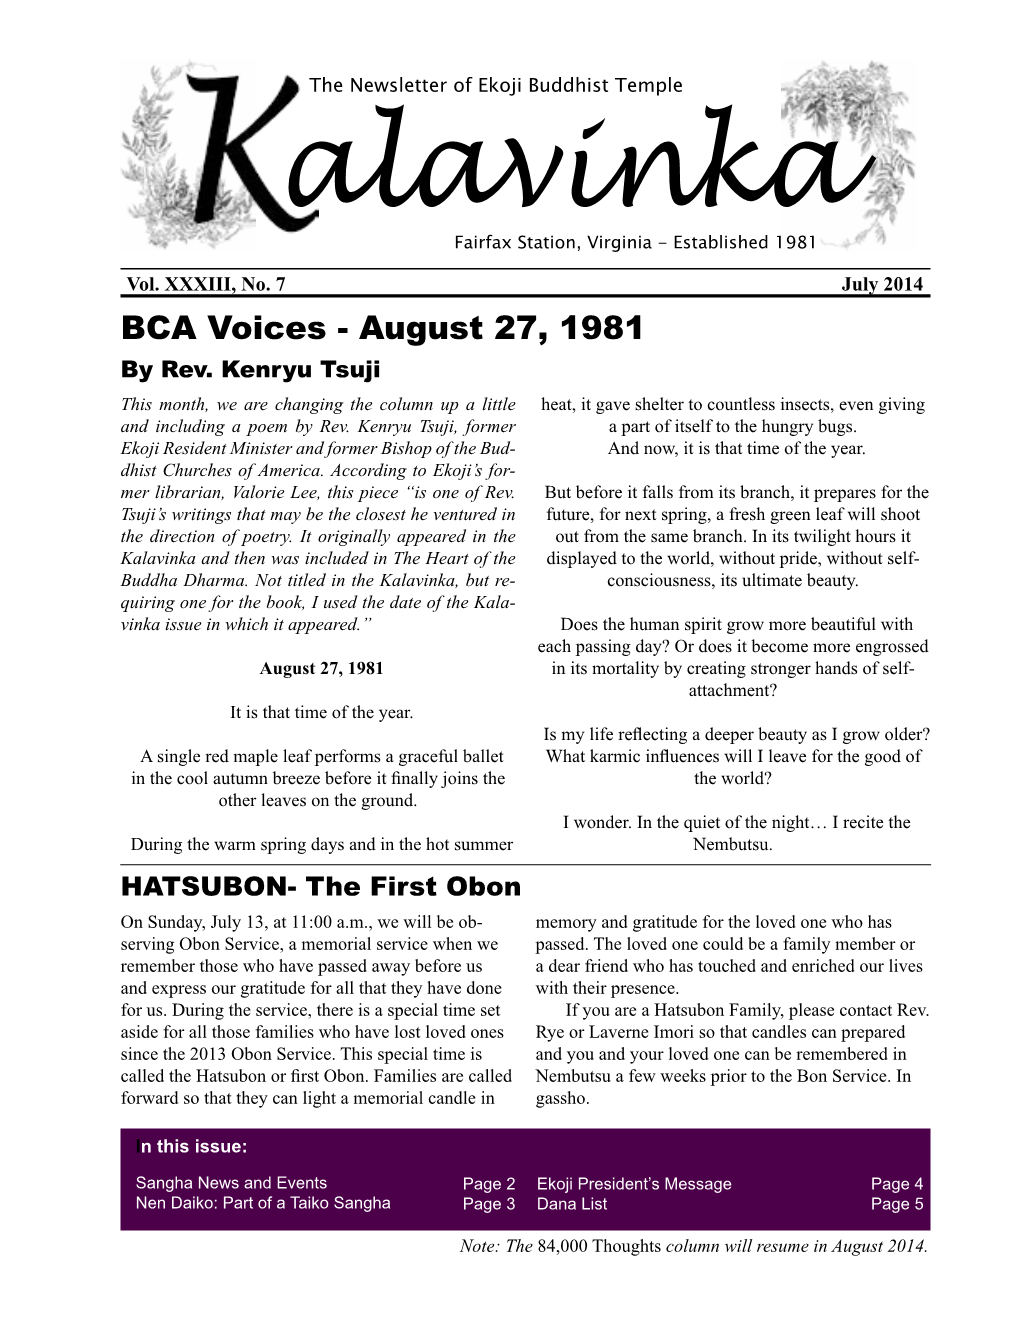 BCA Voices - August 27, 1981 by Rev